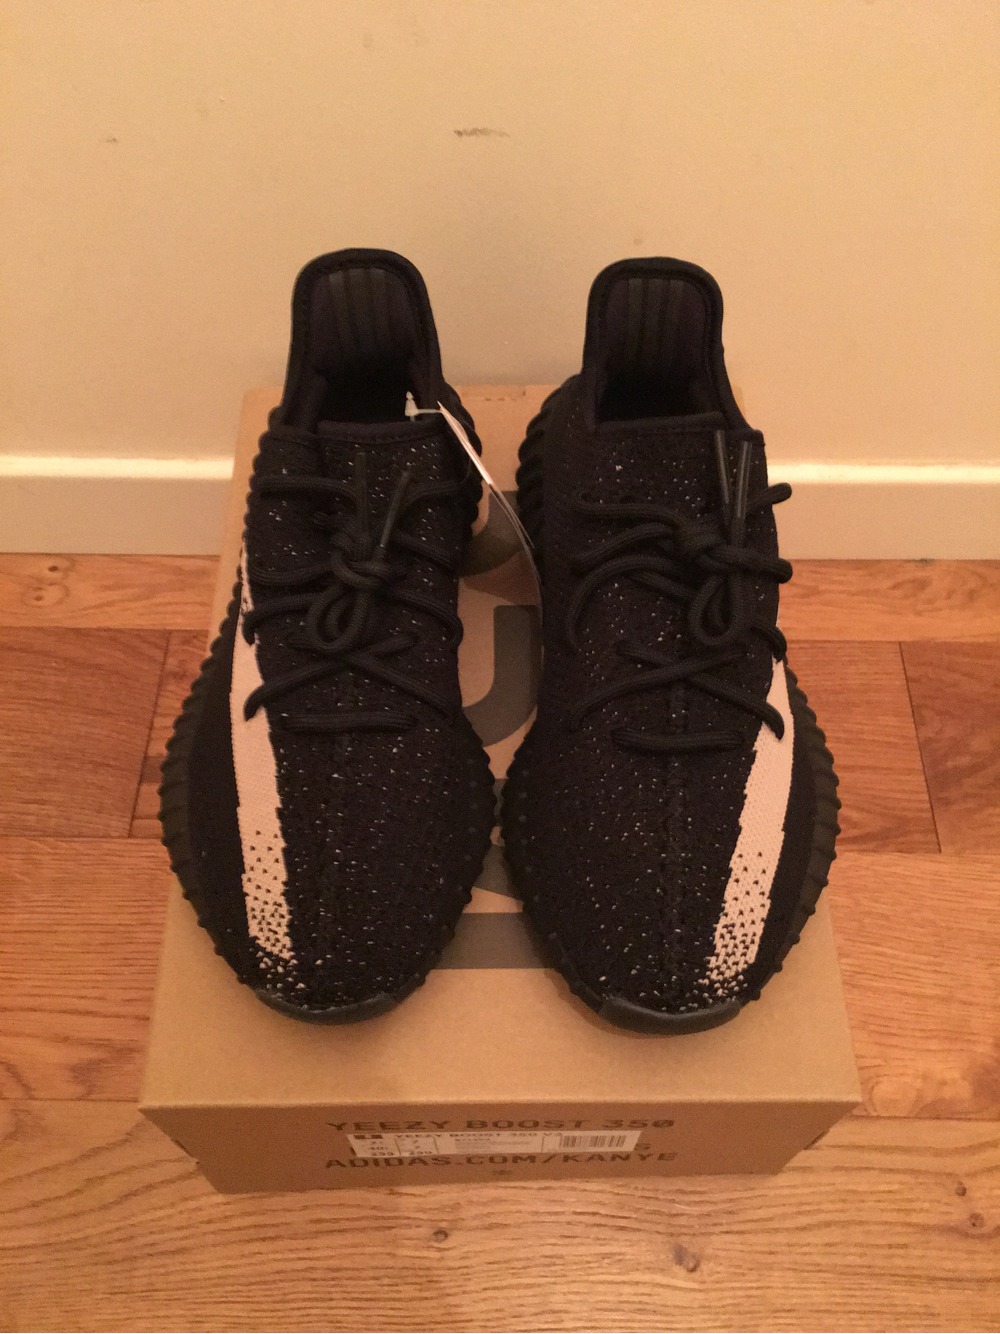 Yeezy Women's Trainers for Sale